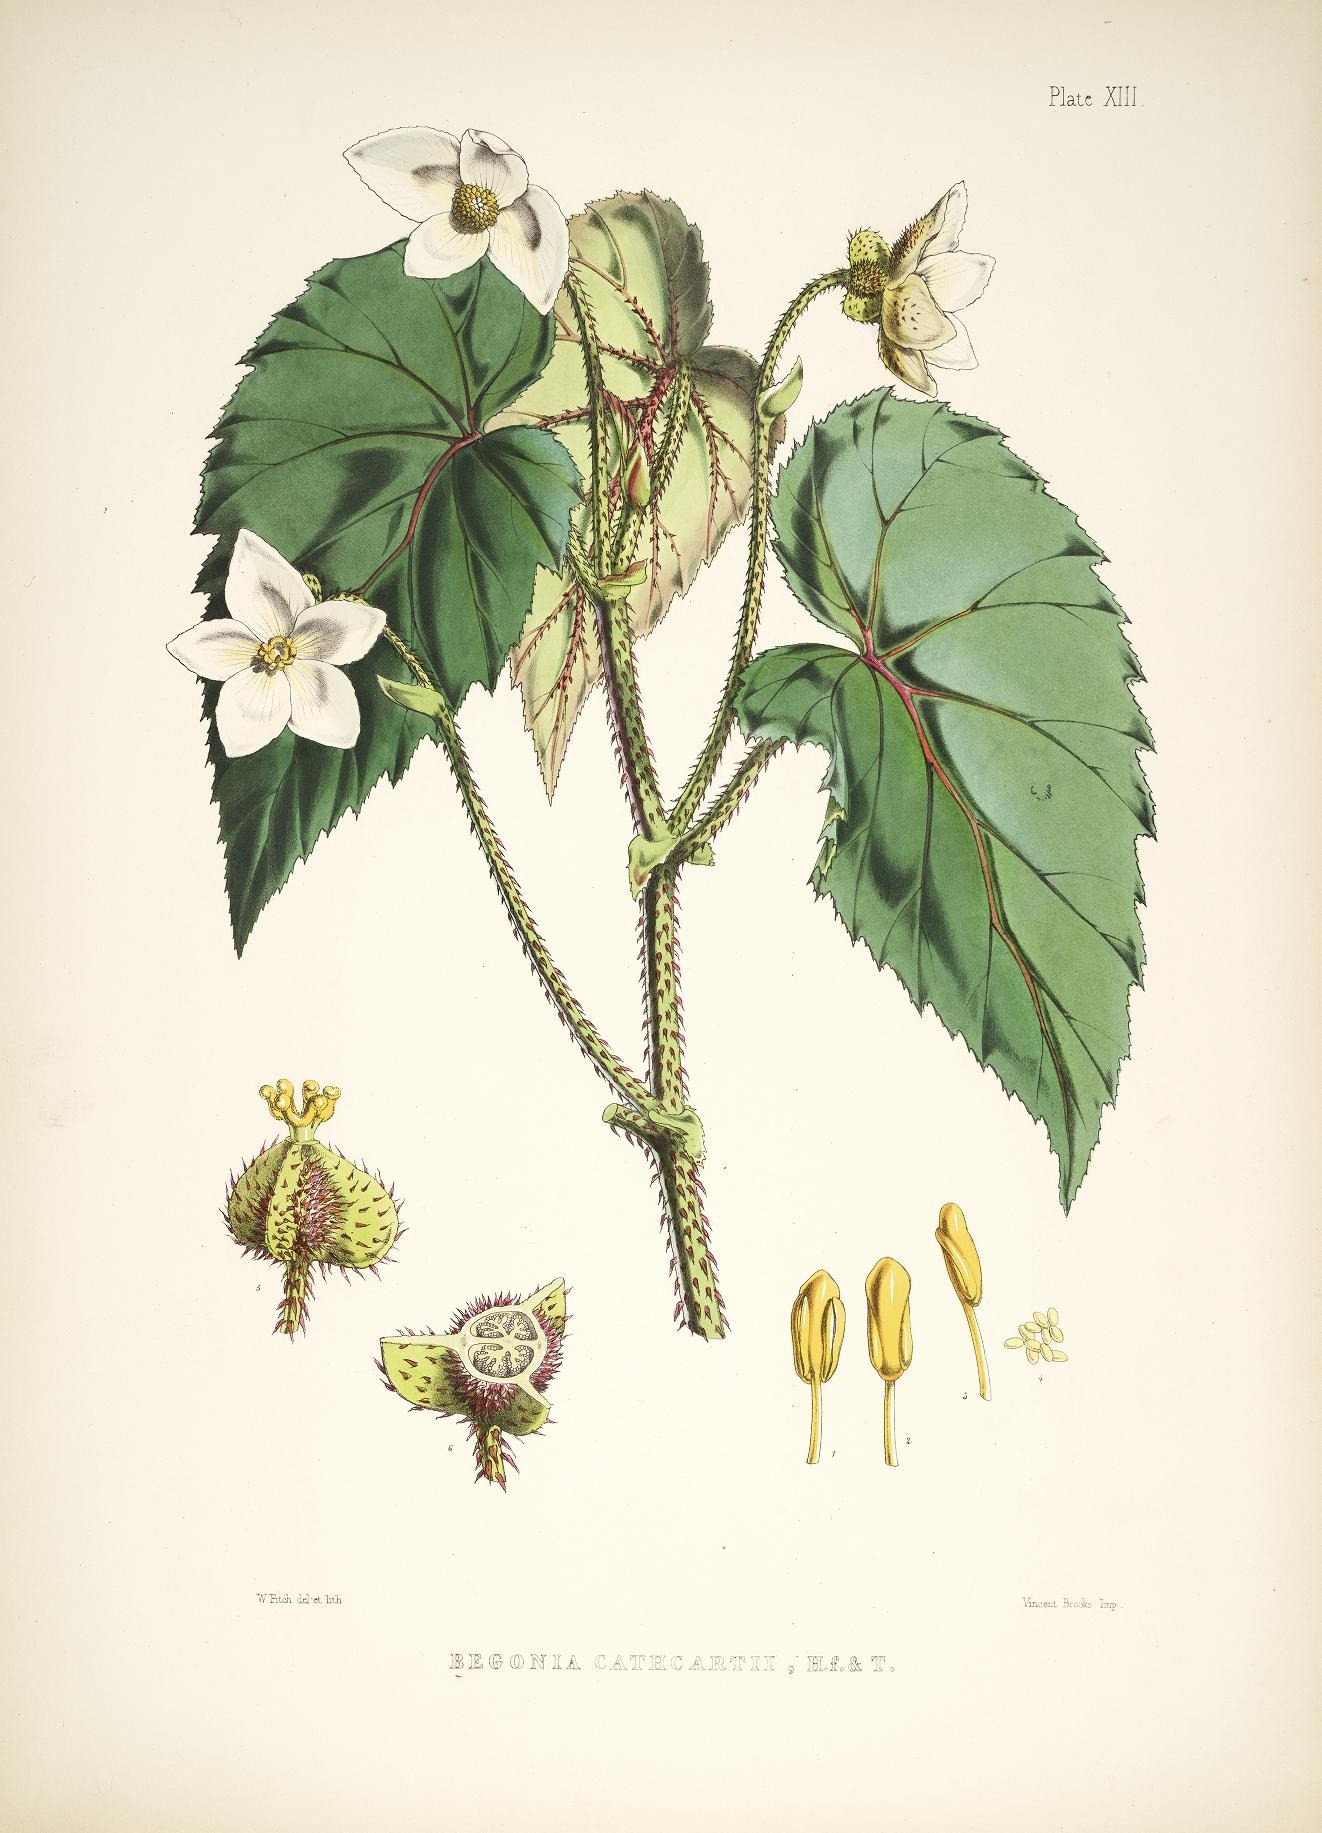 an illustration showing two flowers that have buds, one has leaves and the other is buds